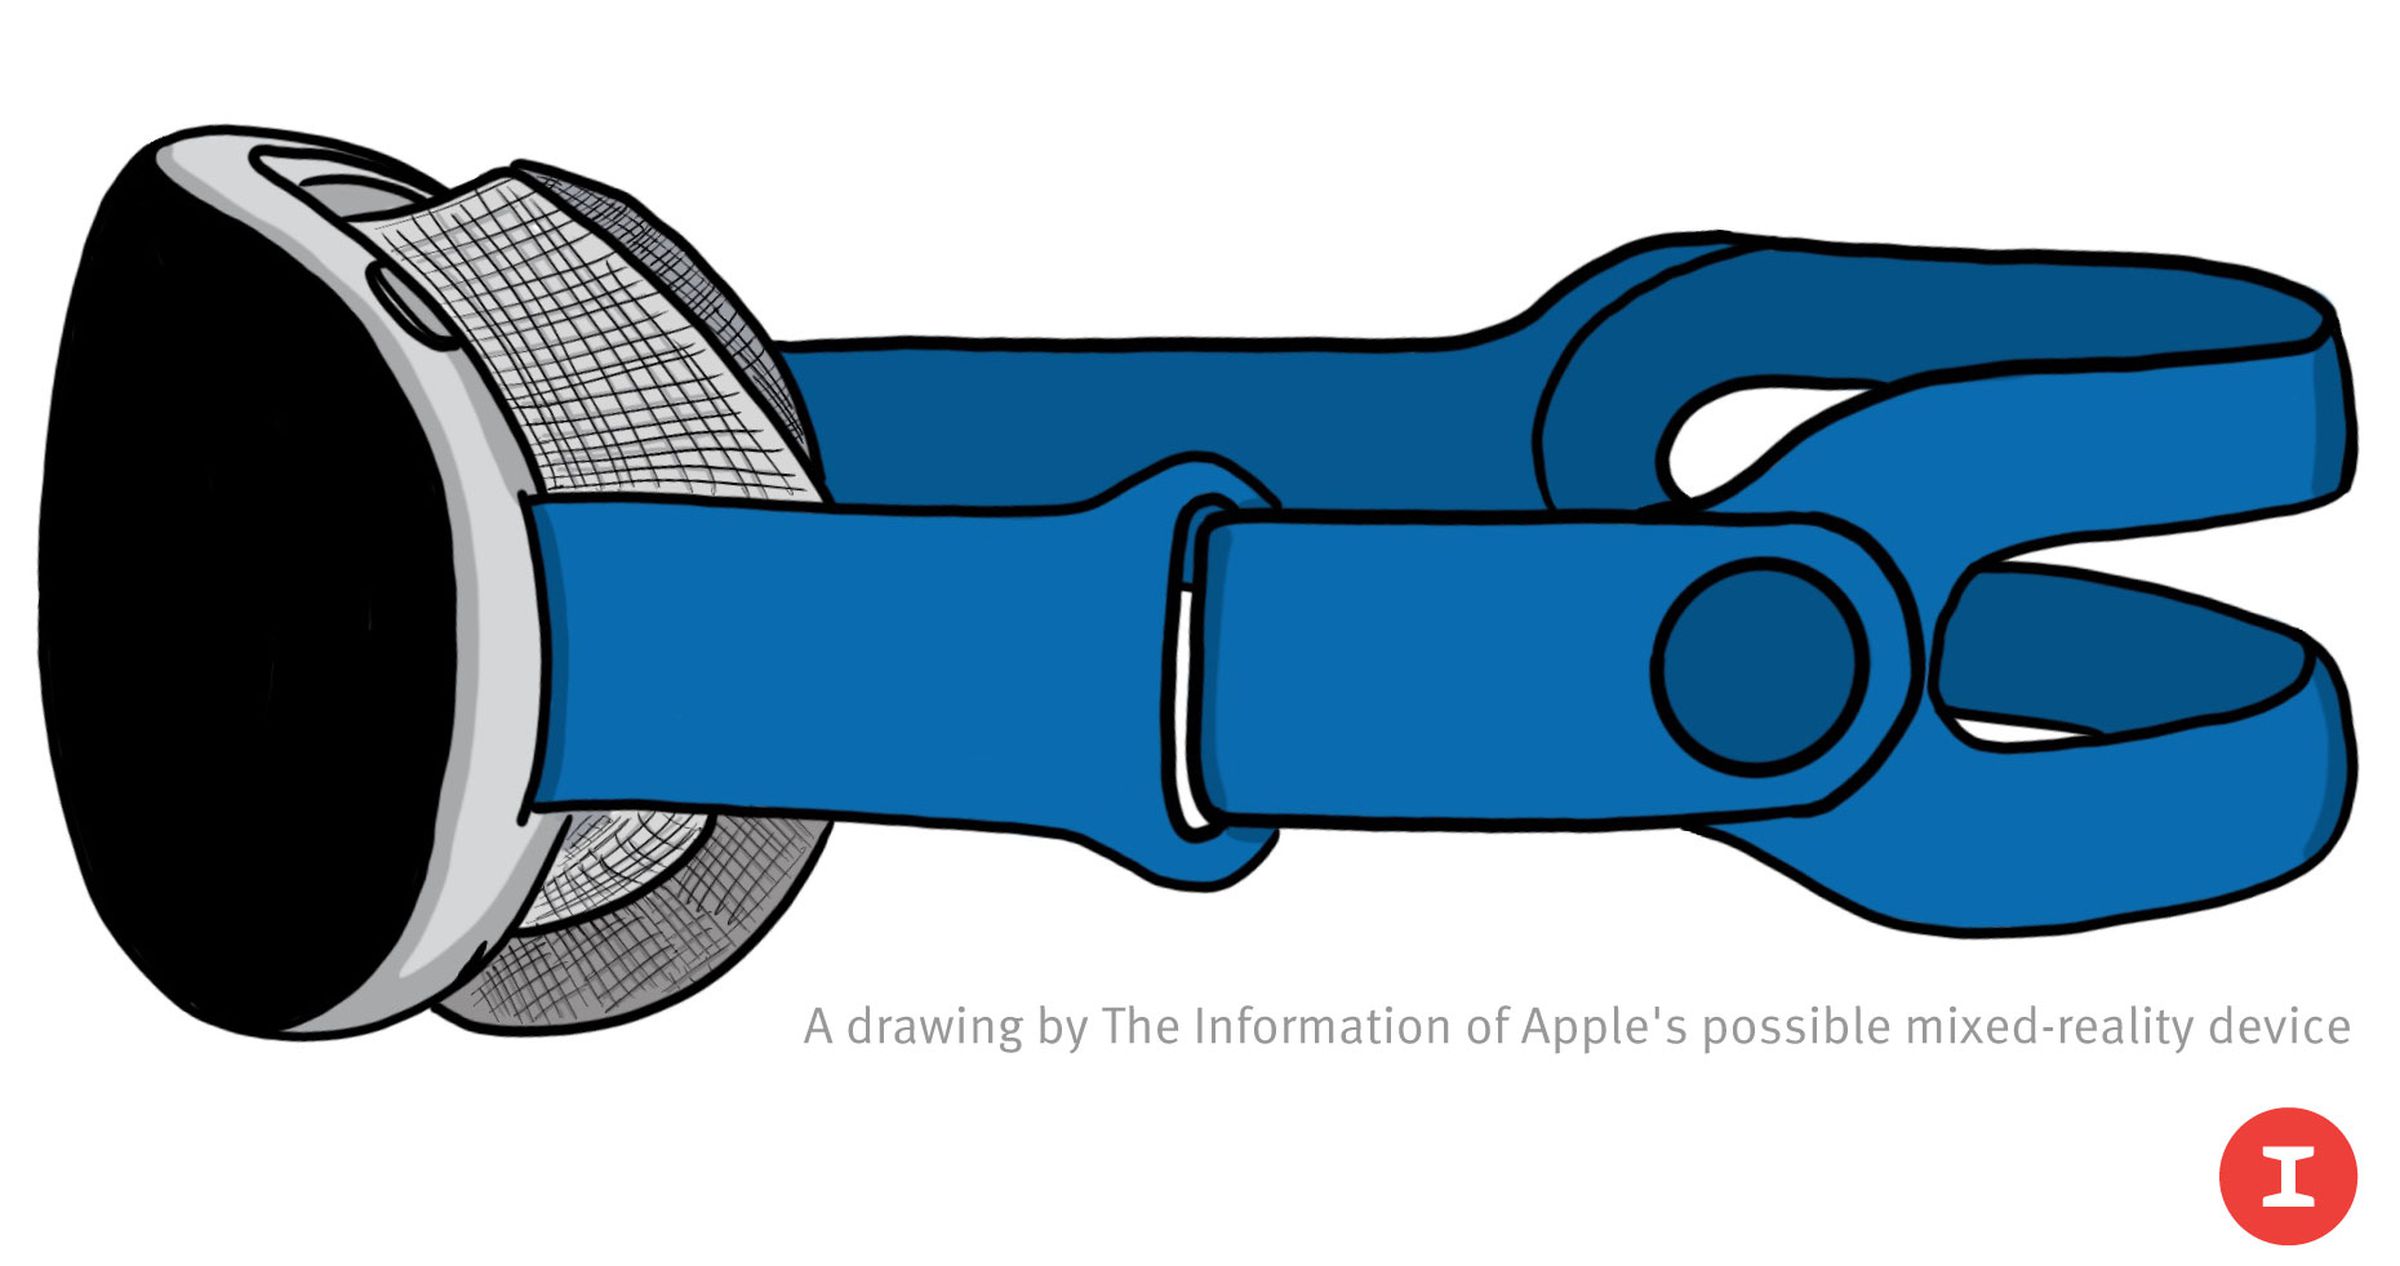 Apple’s headset could reportedly look like this.